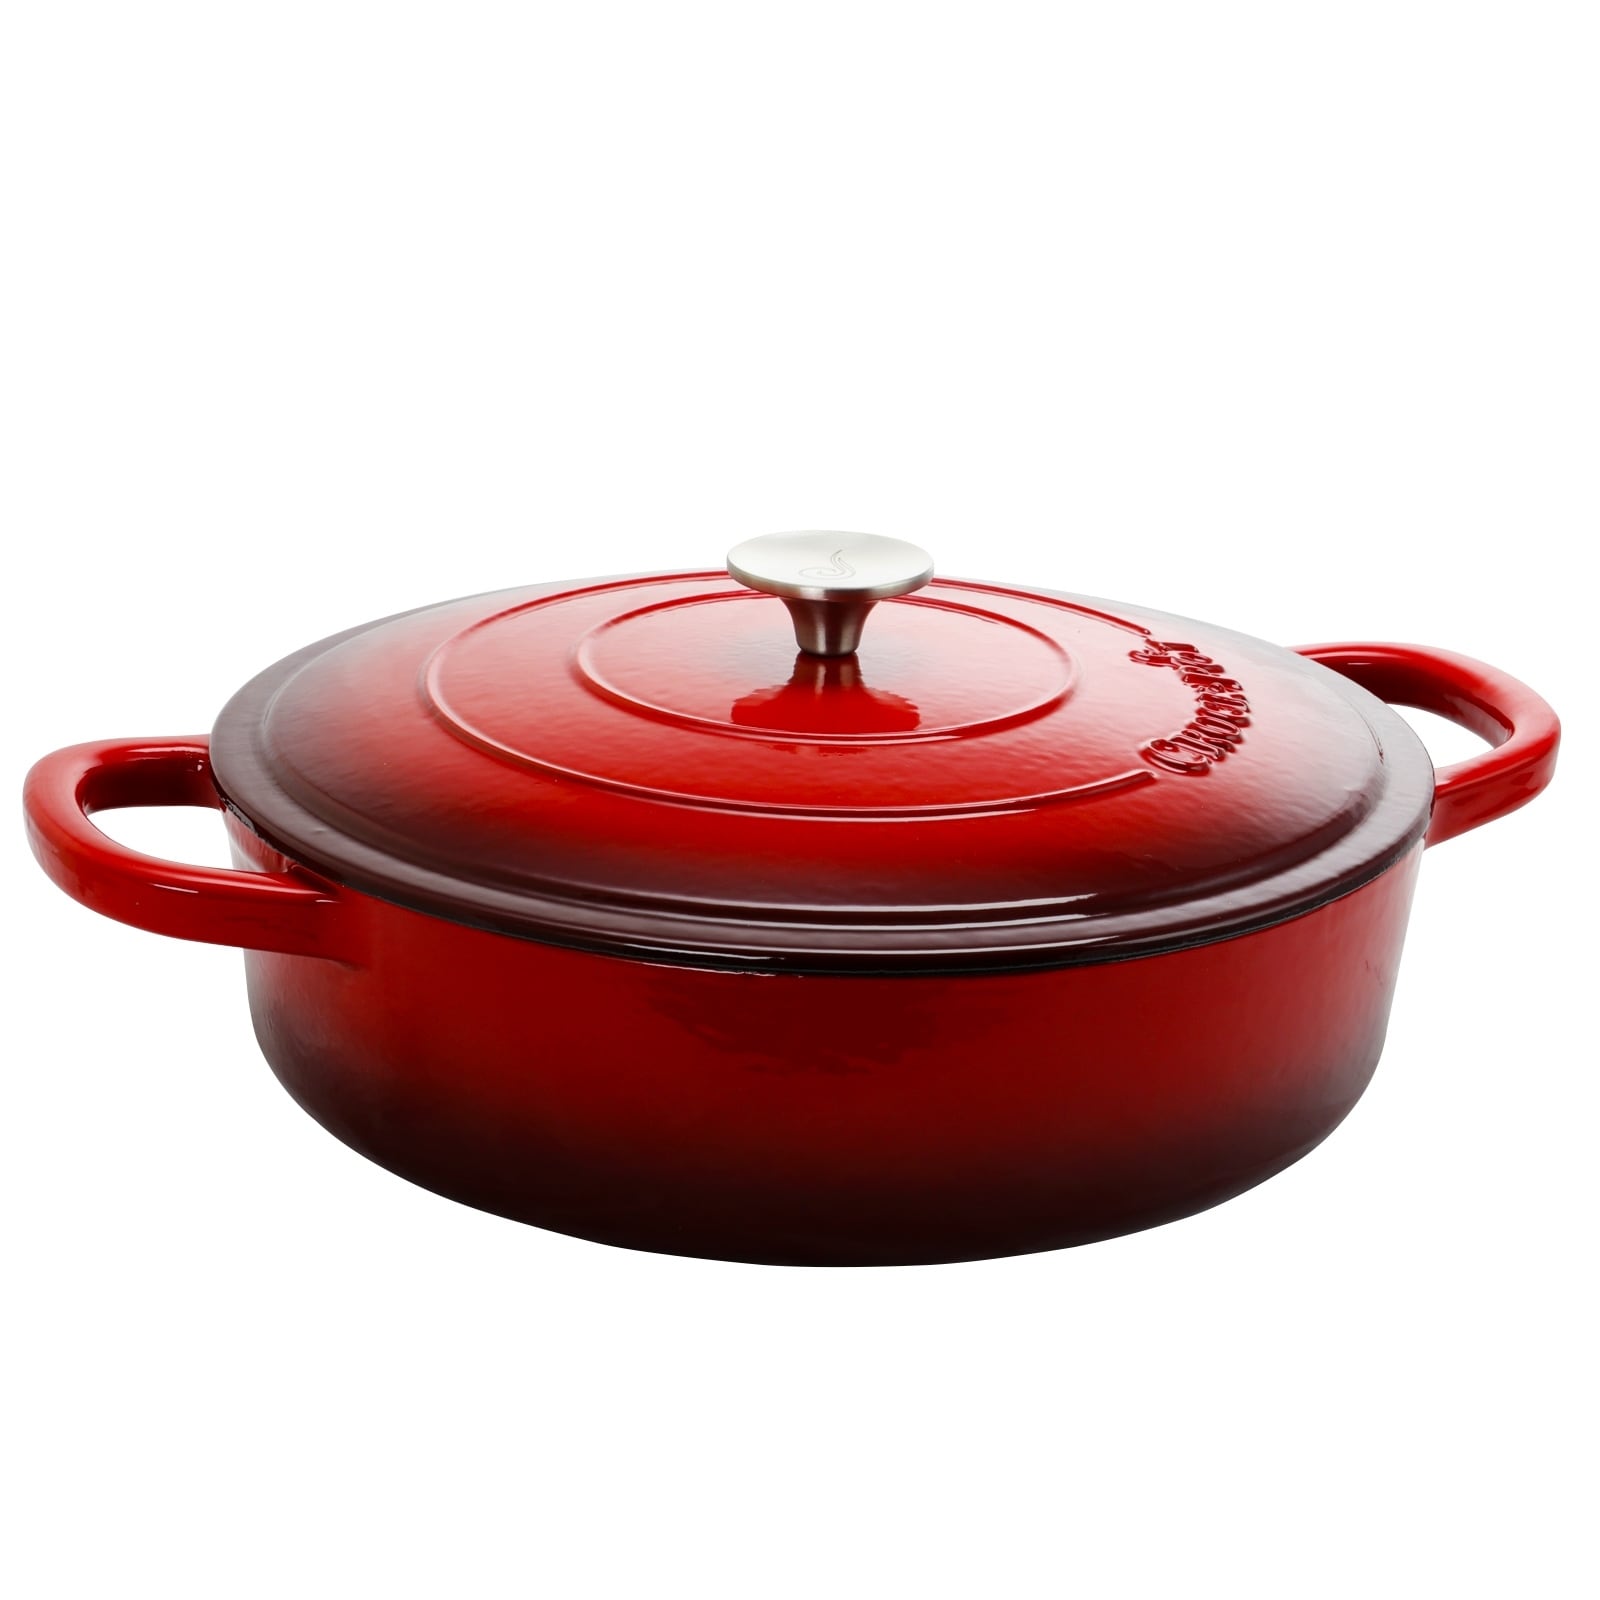 https://ak1.ostkcdn.com/images/products/is/images/direct/b4254271c659e4dde9c63d9bd4989cba24210cea/Enameled-Cast-Iron-5-Quart-Round-Braising-Pan-W--Lid-in-Ruby.jpg